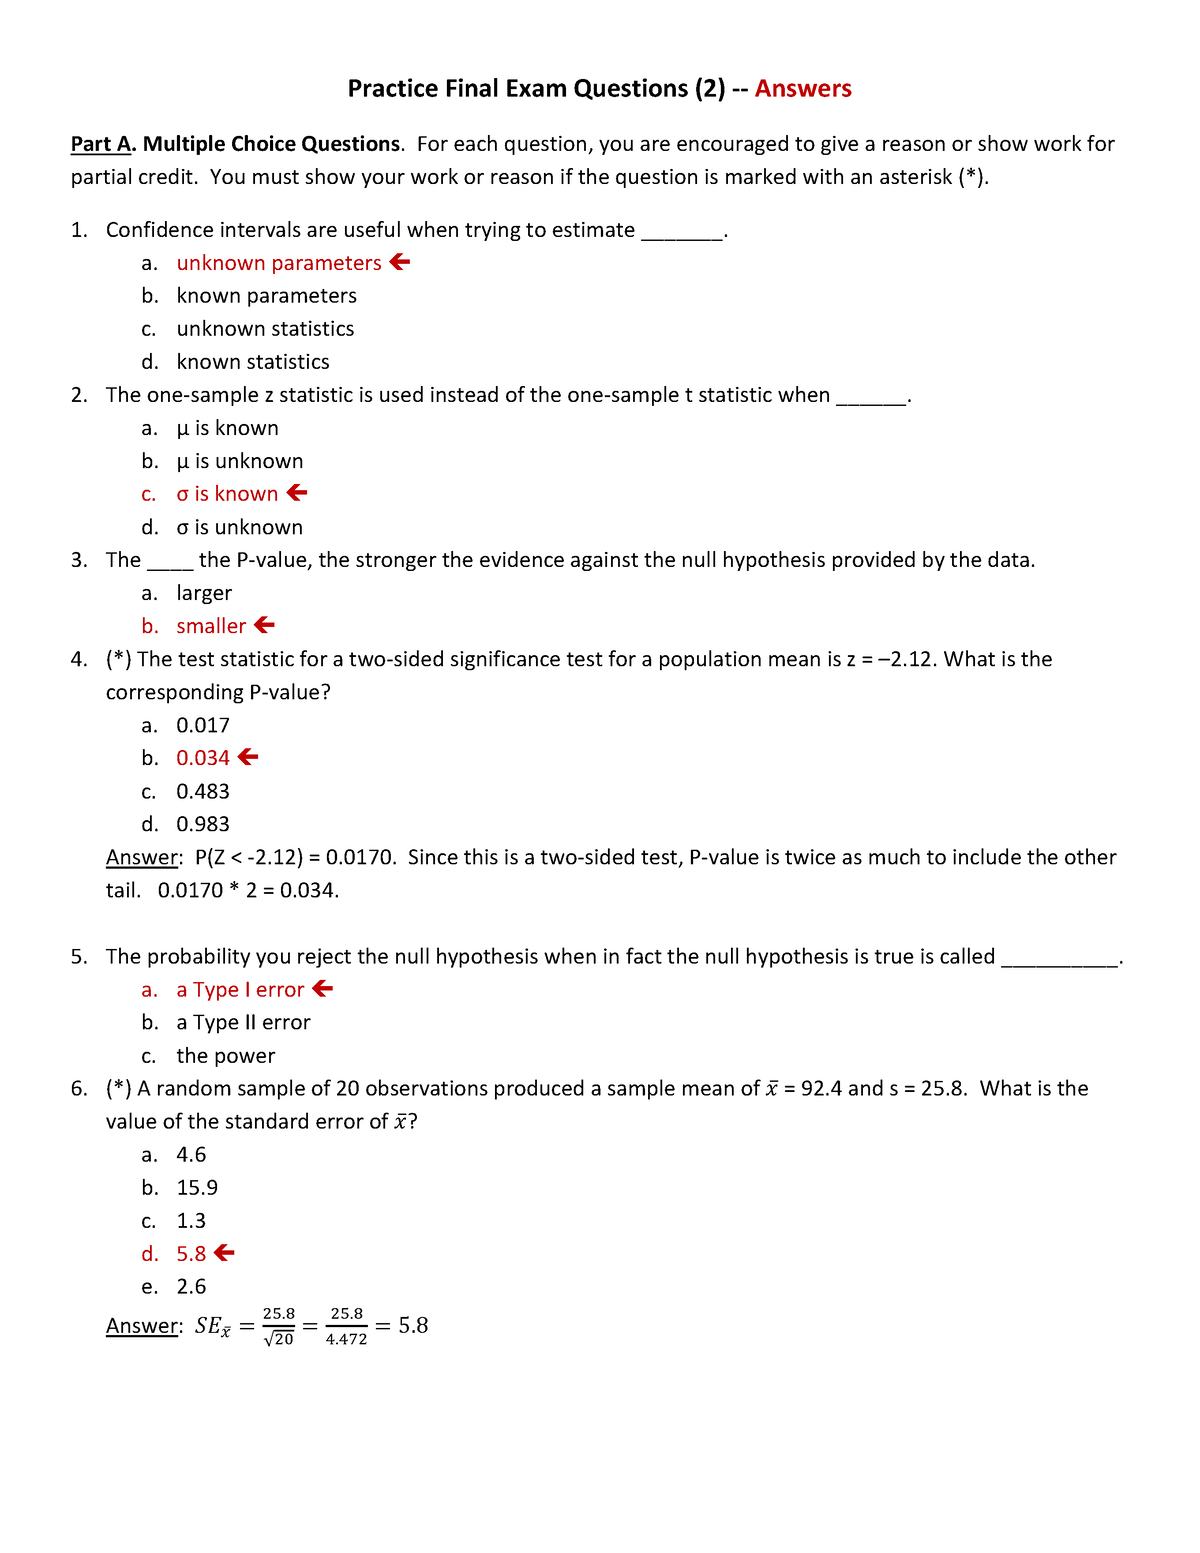 research final exam questions and answers pdf